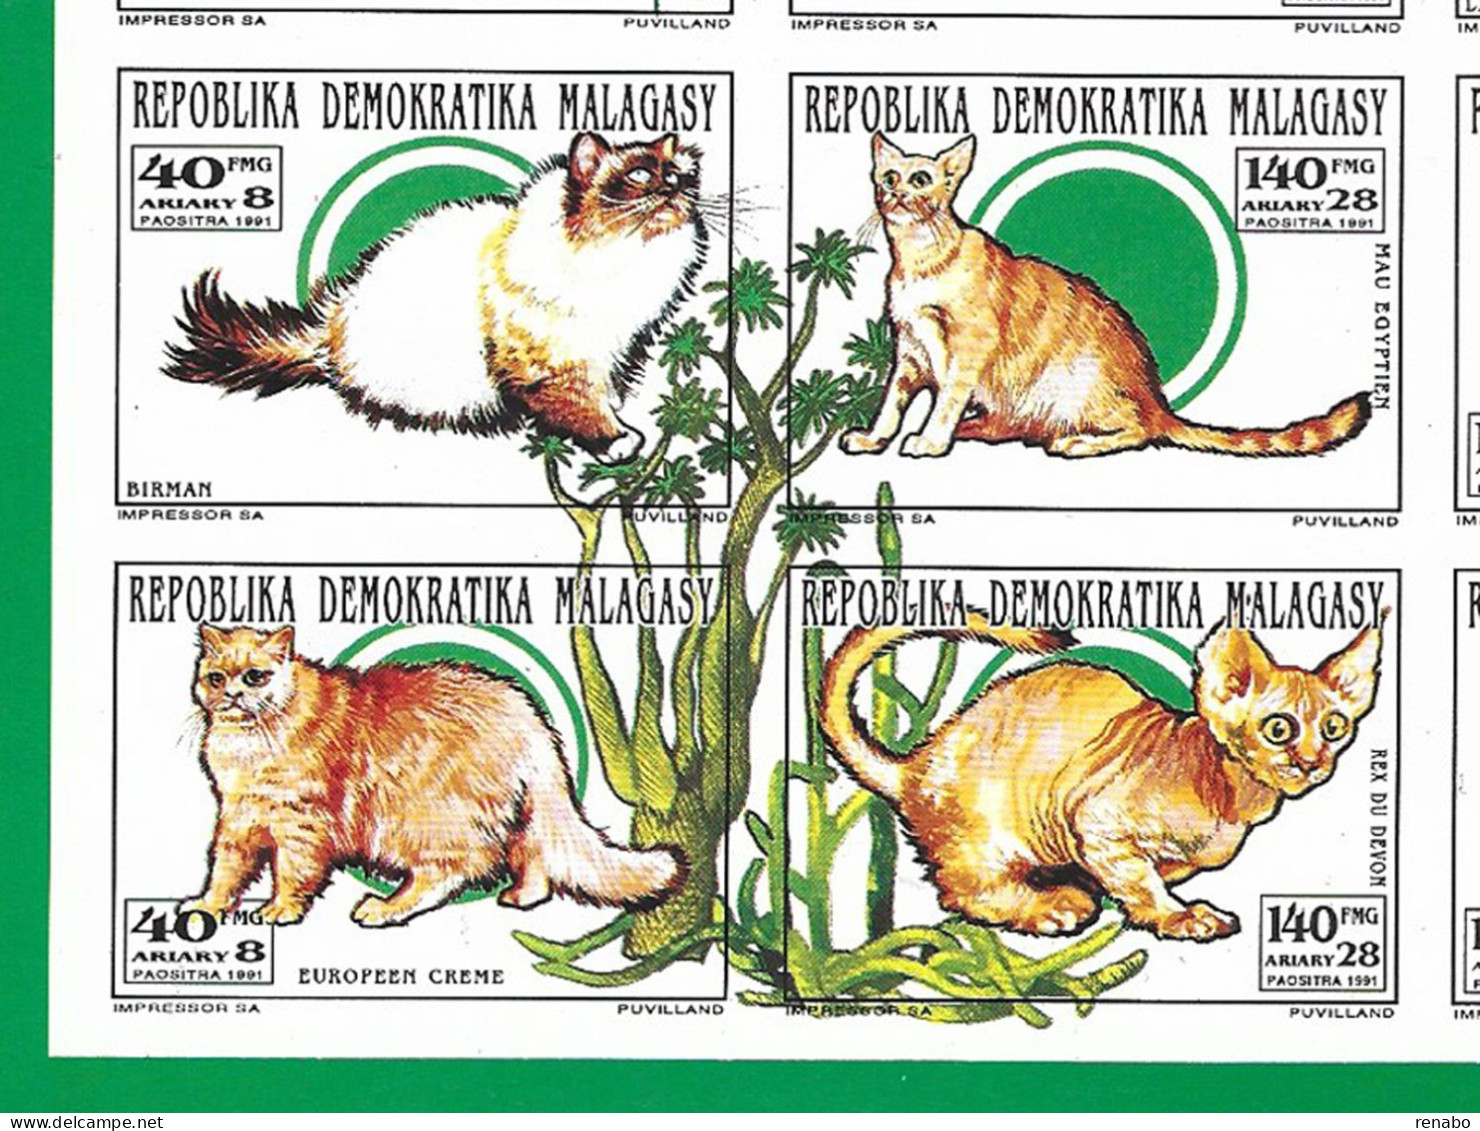 Madagascar, Malagasy 1993; Fauna: CATS, Dogs, Insects, Reptiles; 4 Quatrains Form A Block Of 16v. IMPERFORATED - Domestic Cats